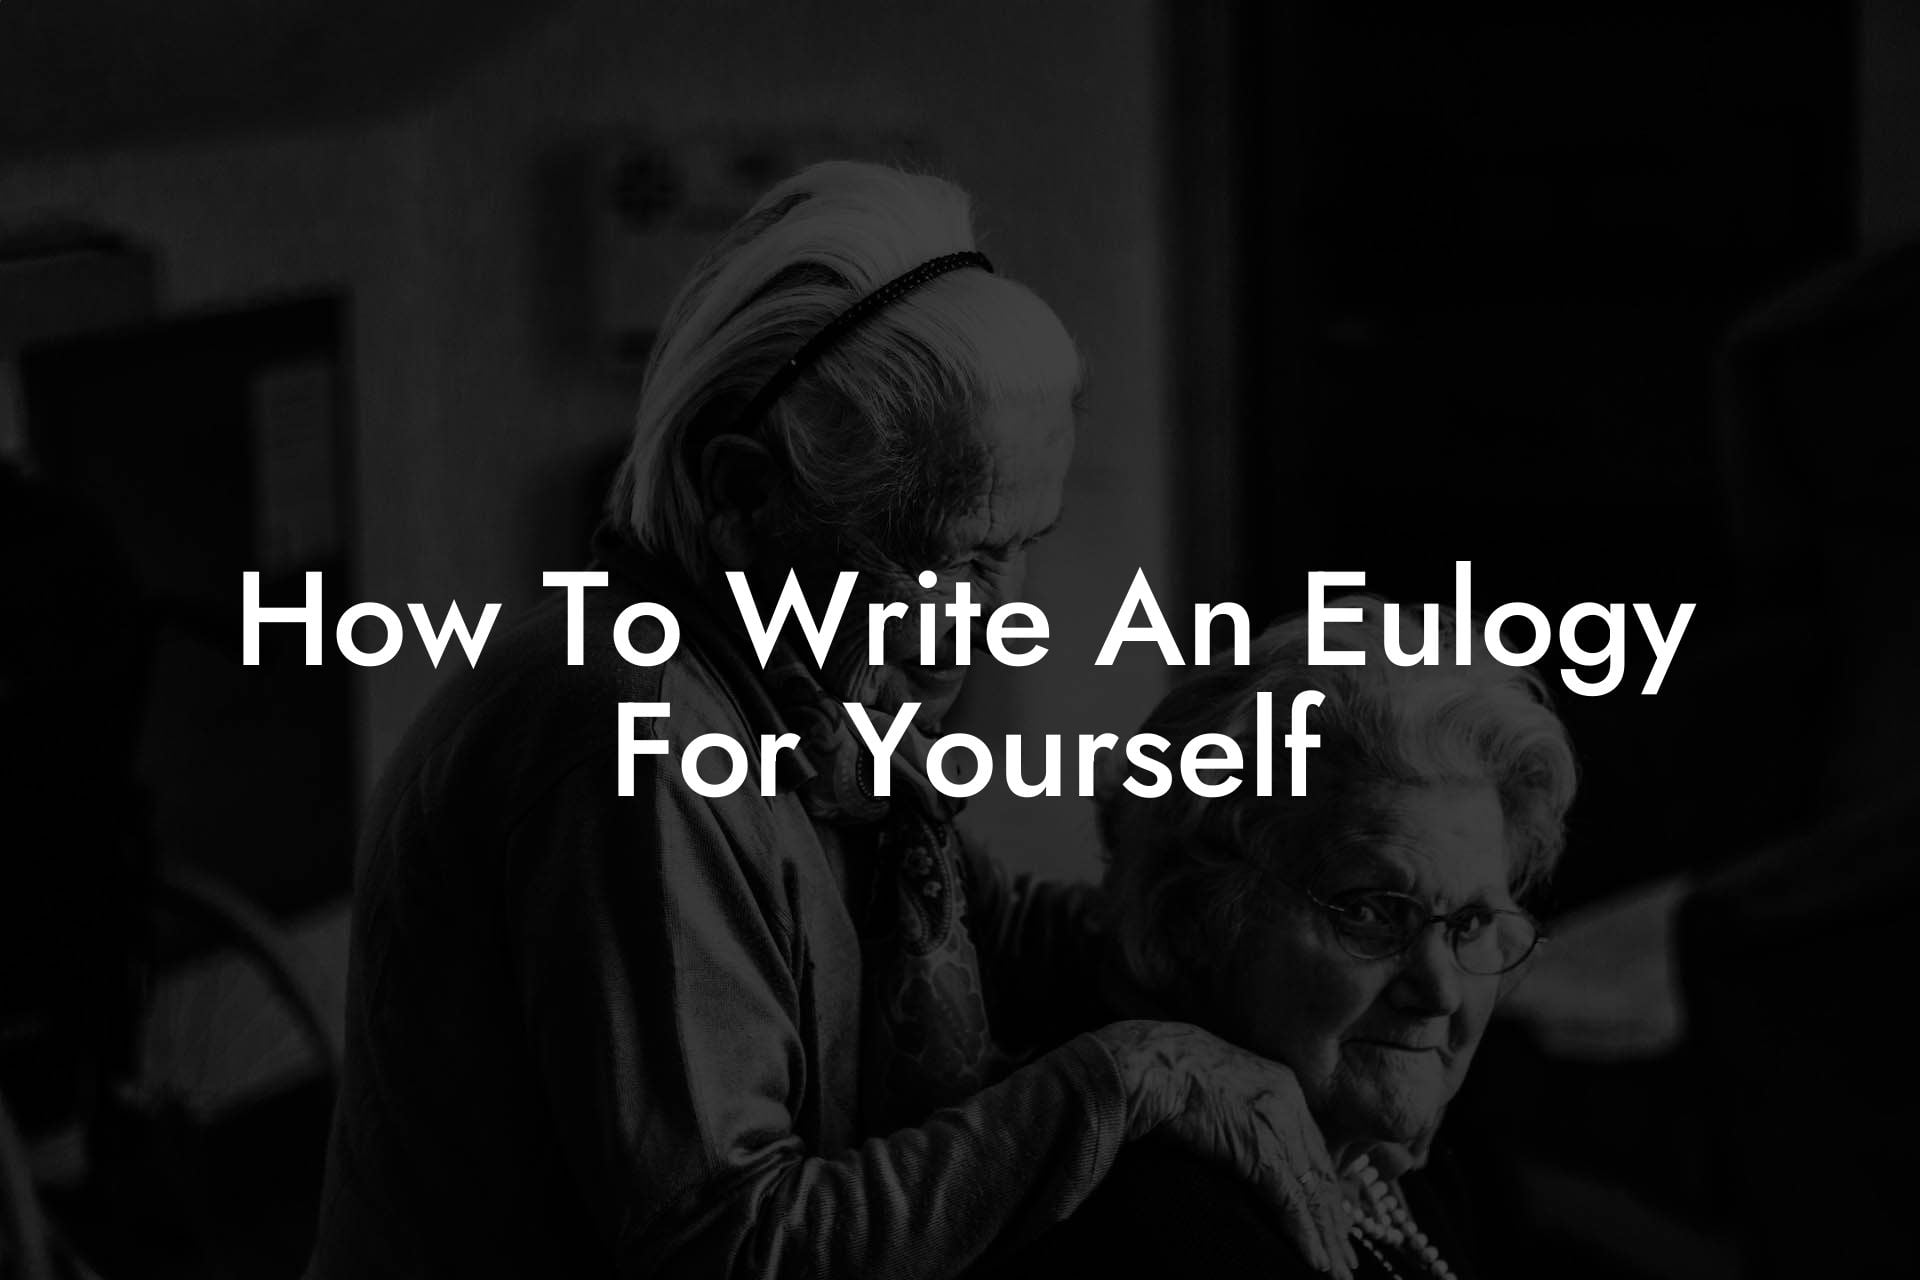 How To Write An Eulogy For Yourself